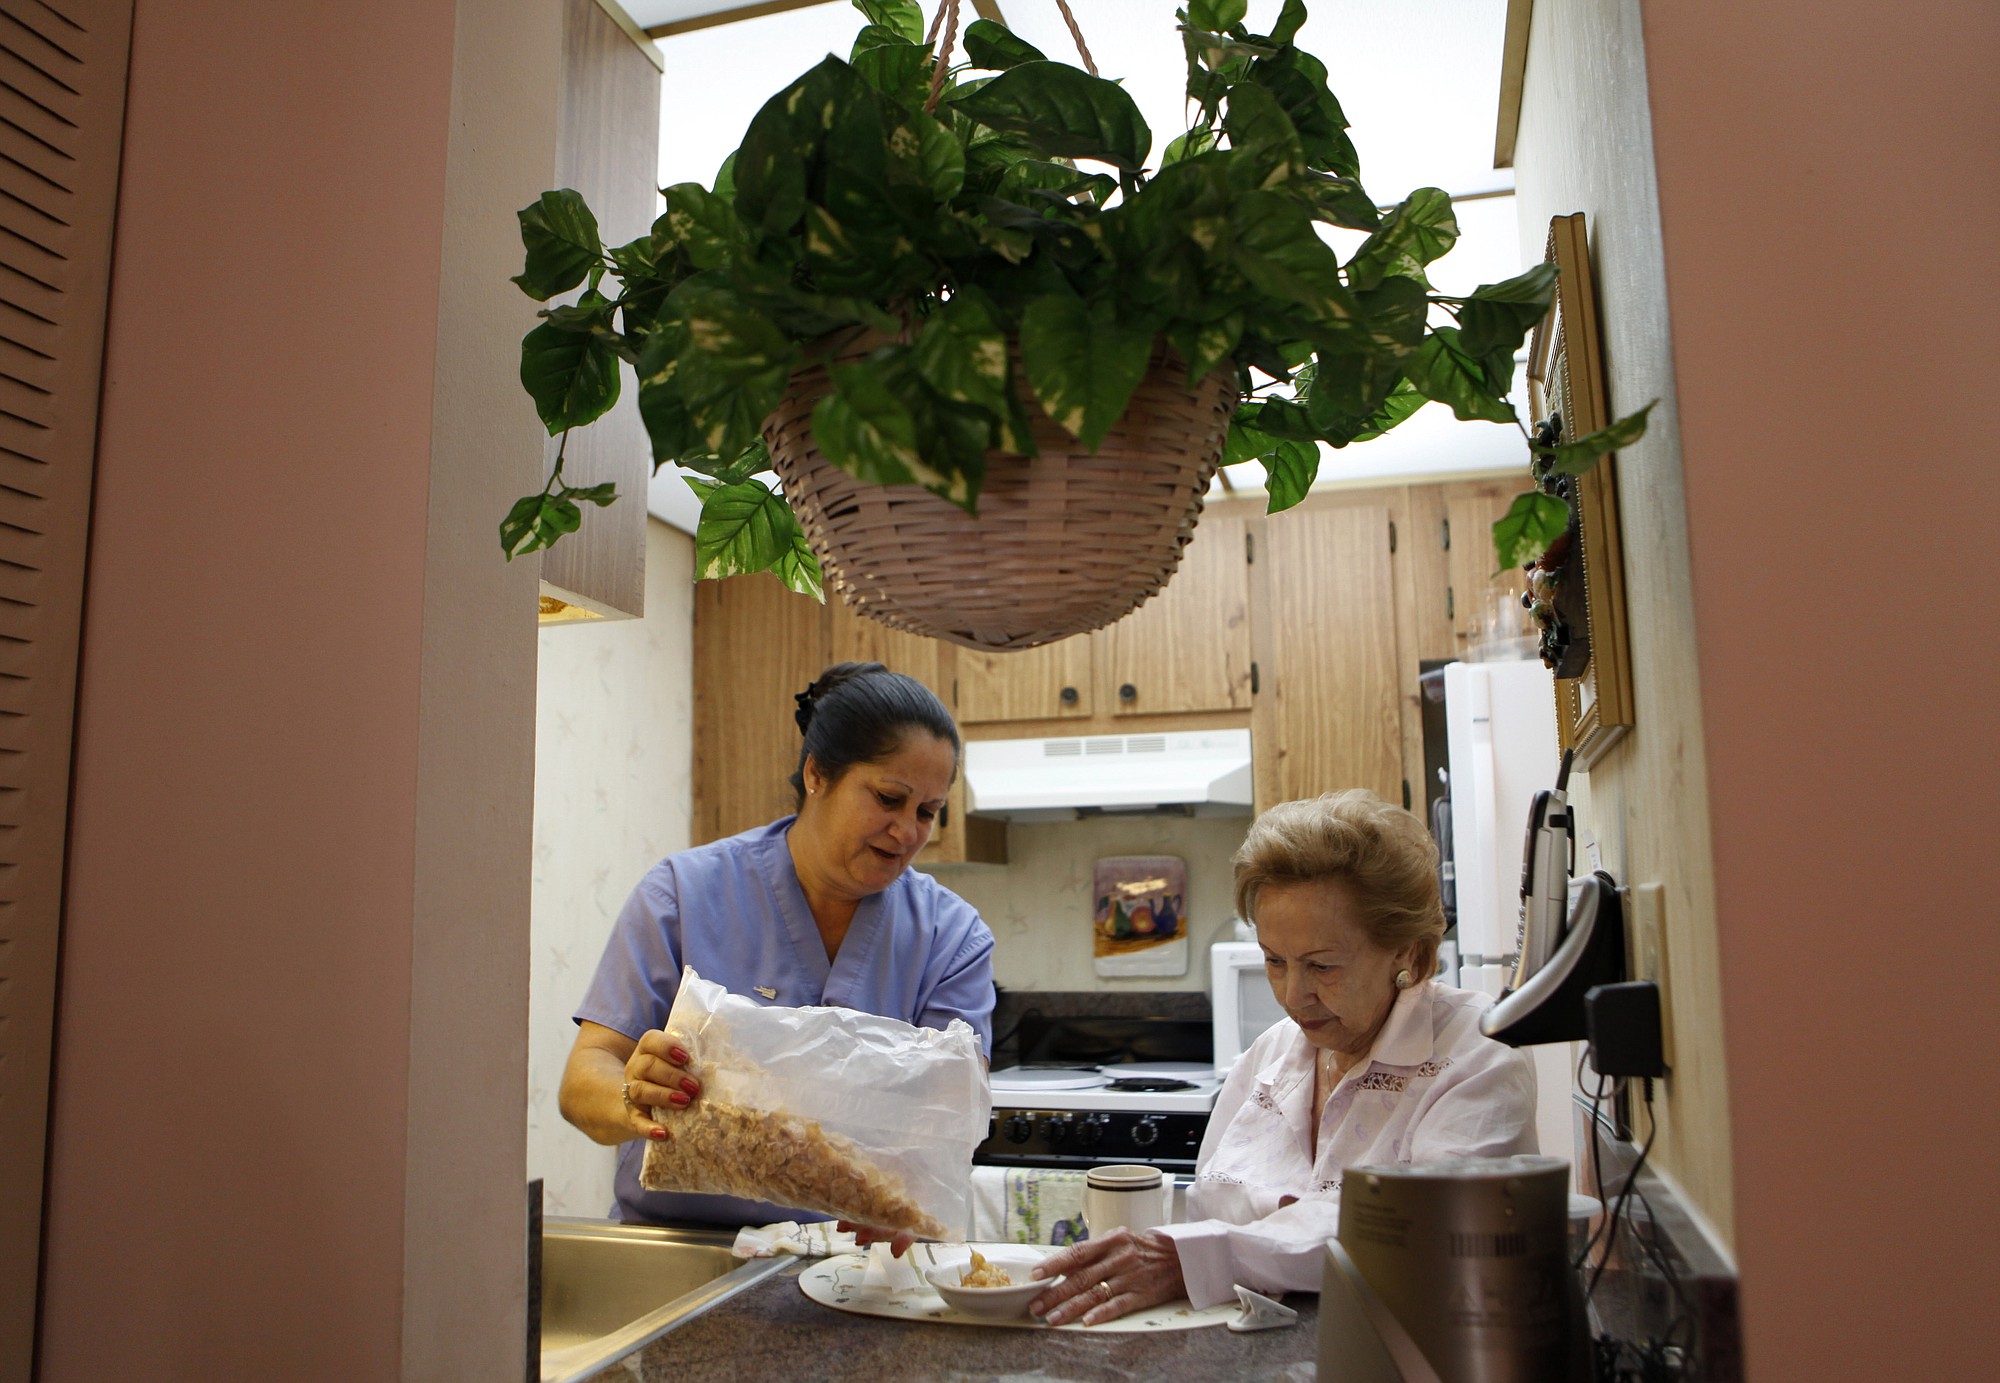 FILE - In this Sept. 3, 2010 file photo, United Home Care Services home health aide Maria Fernandez, left, pours cereal for Herminia Vega, 83, right, as she performs household chores for Vega and her husband, in Miami. On average, nearly 70 percent of people who turn 65 years-old will eventually need some form of long-term care, according to the U.S.